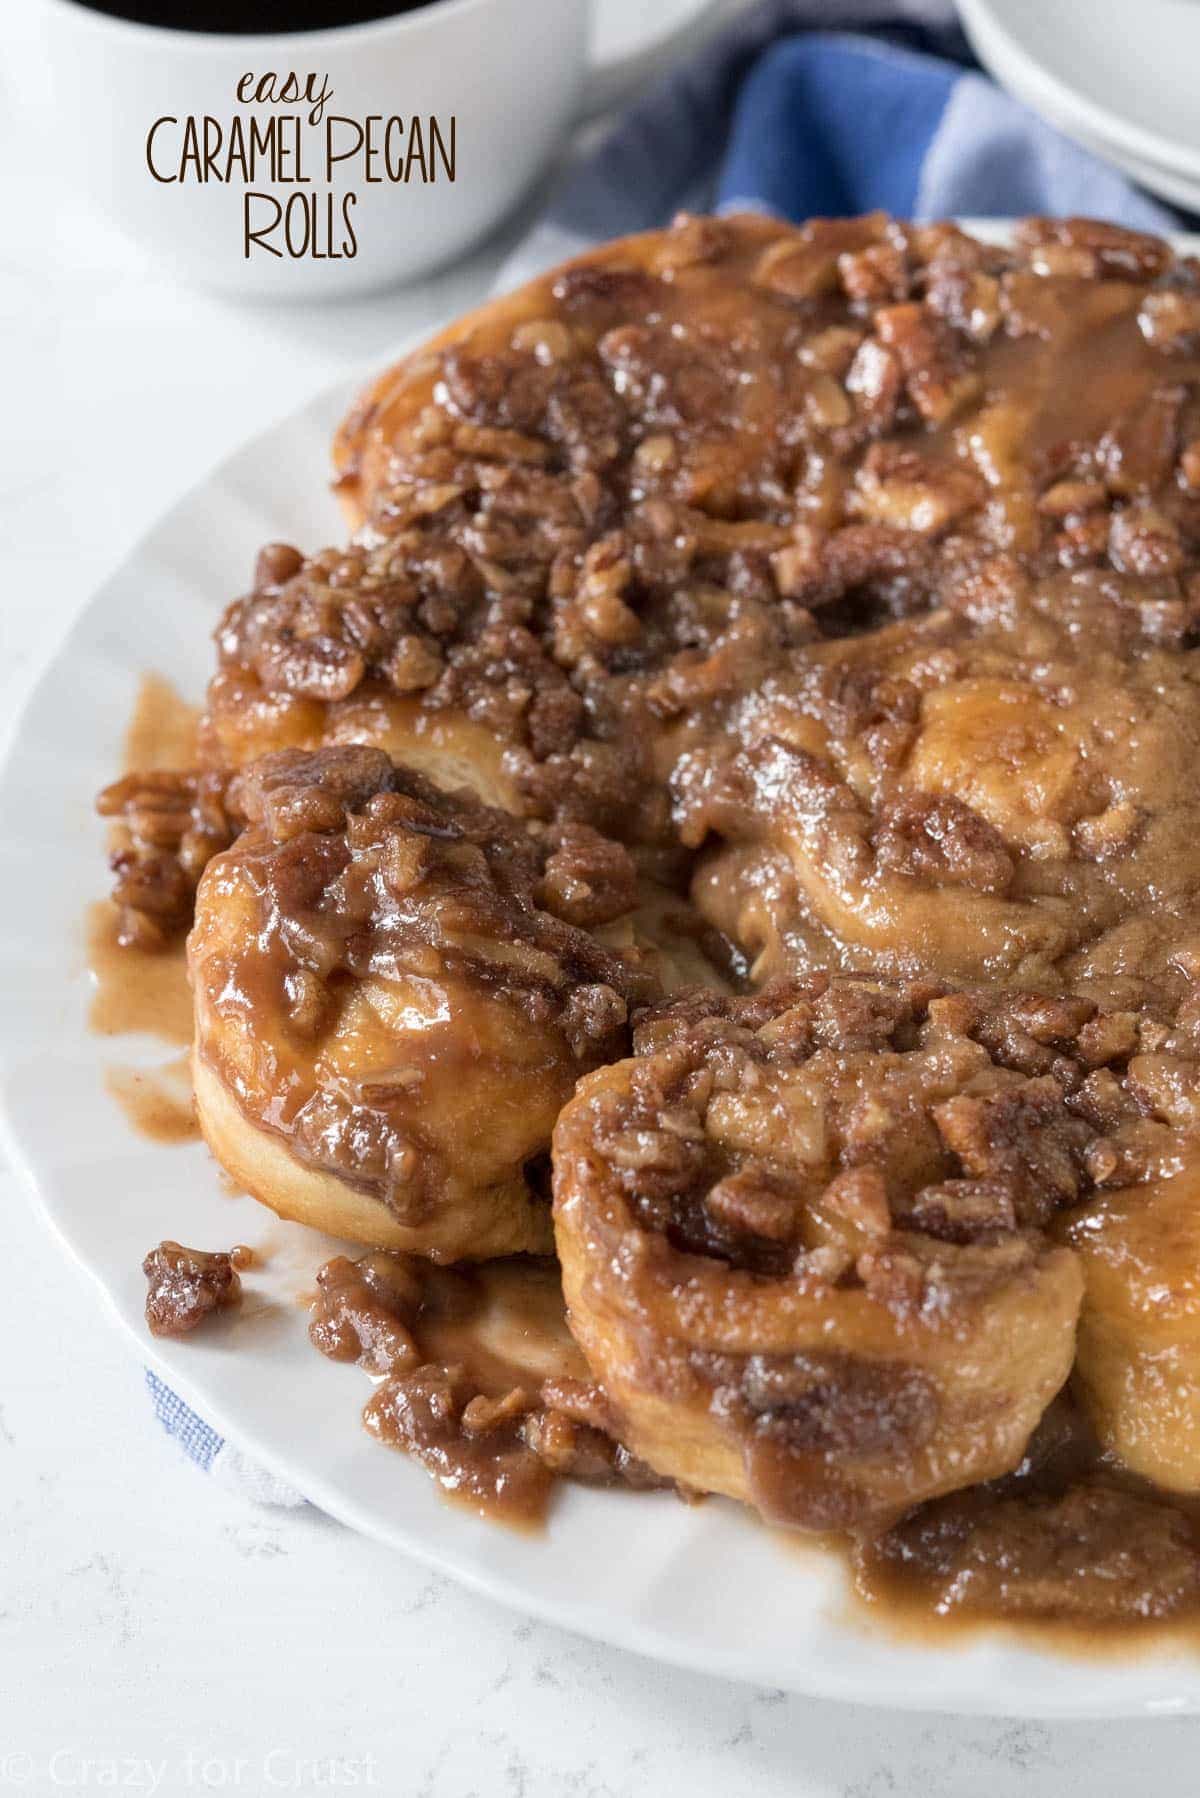 These Easy Caramel Pecan Rolls are the perfect holiday breakfast. Easy, fast, no yeast and no rise, they're foolproof sticky buns without all the work!